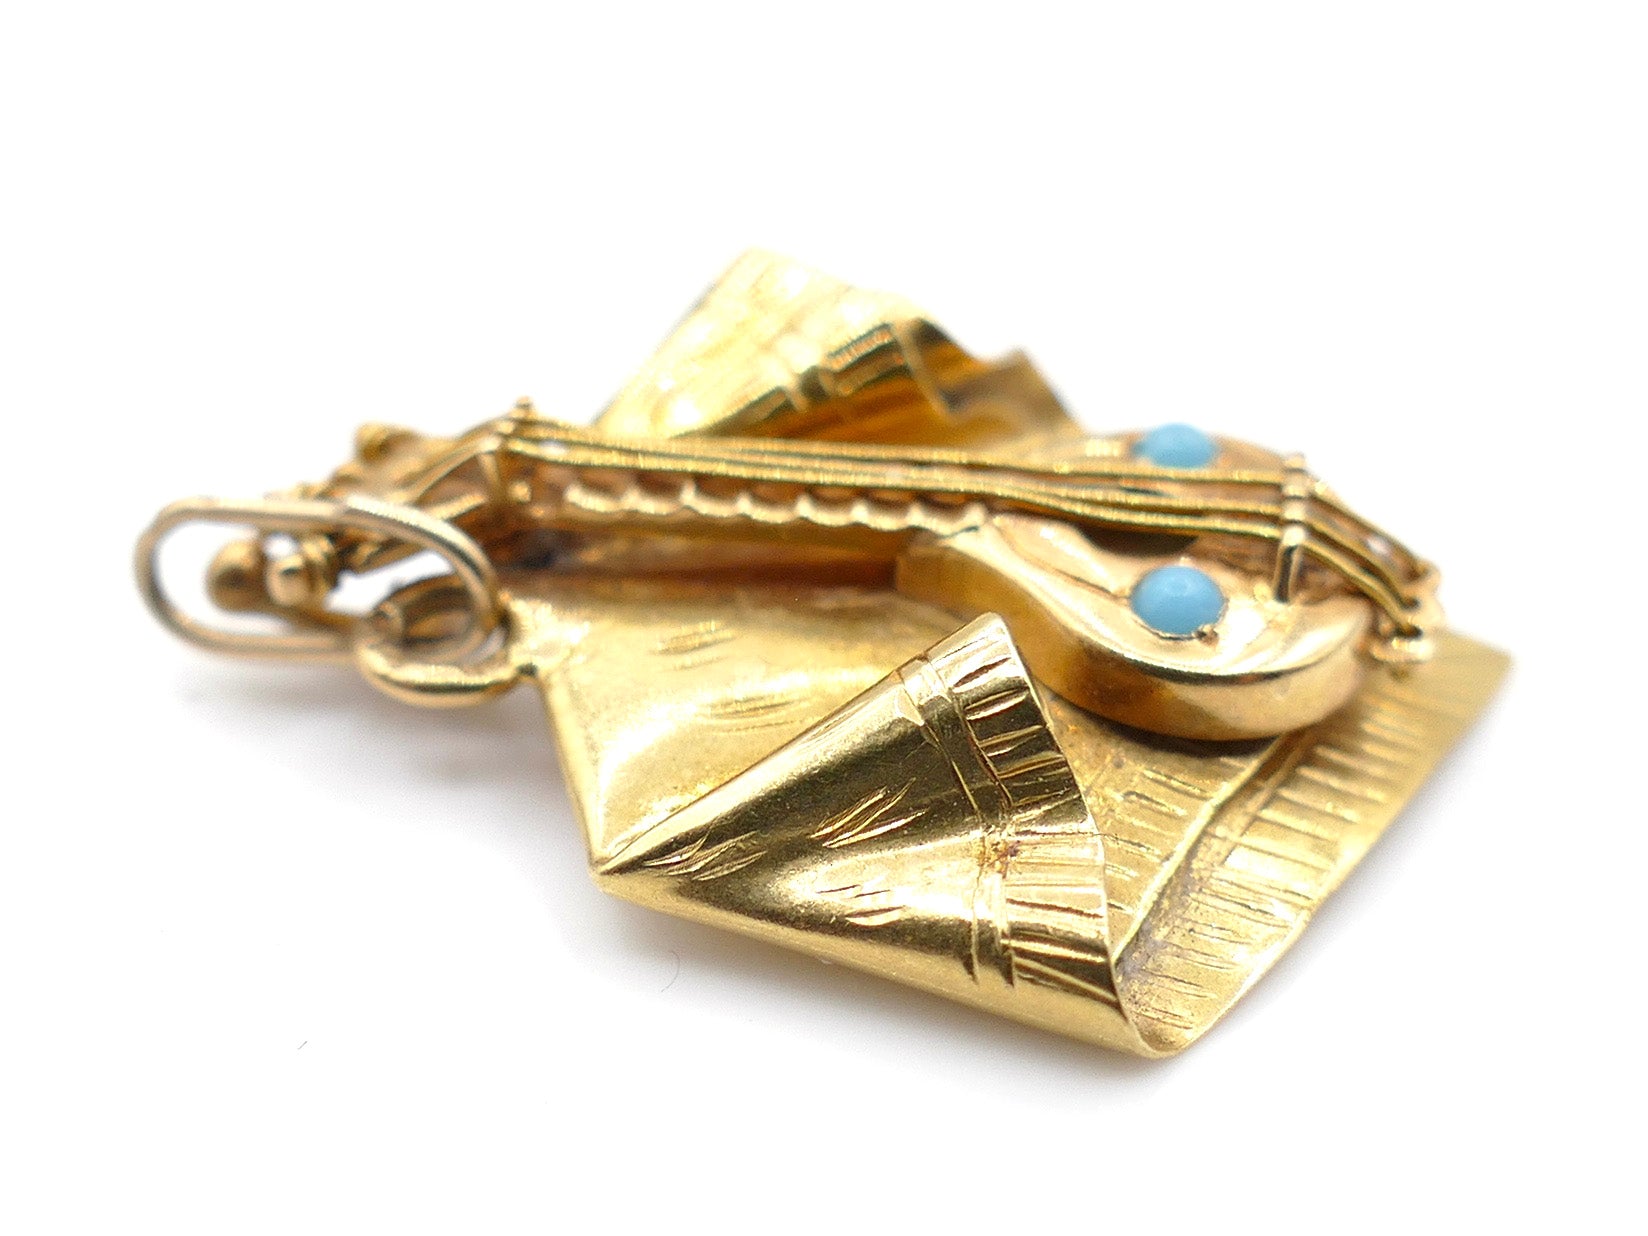 14K Gold and Turquoise Mandolin on Flowing Curtain Charm